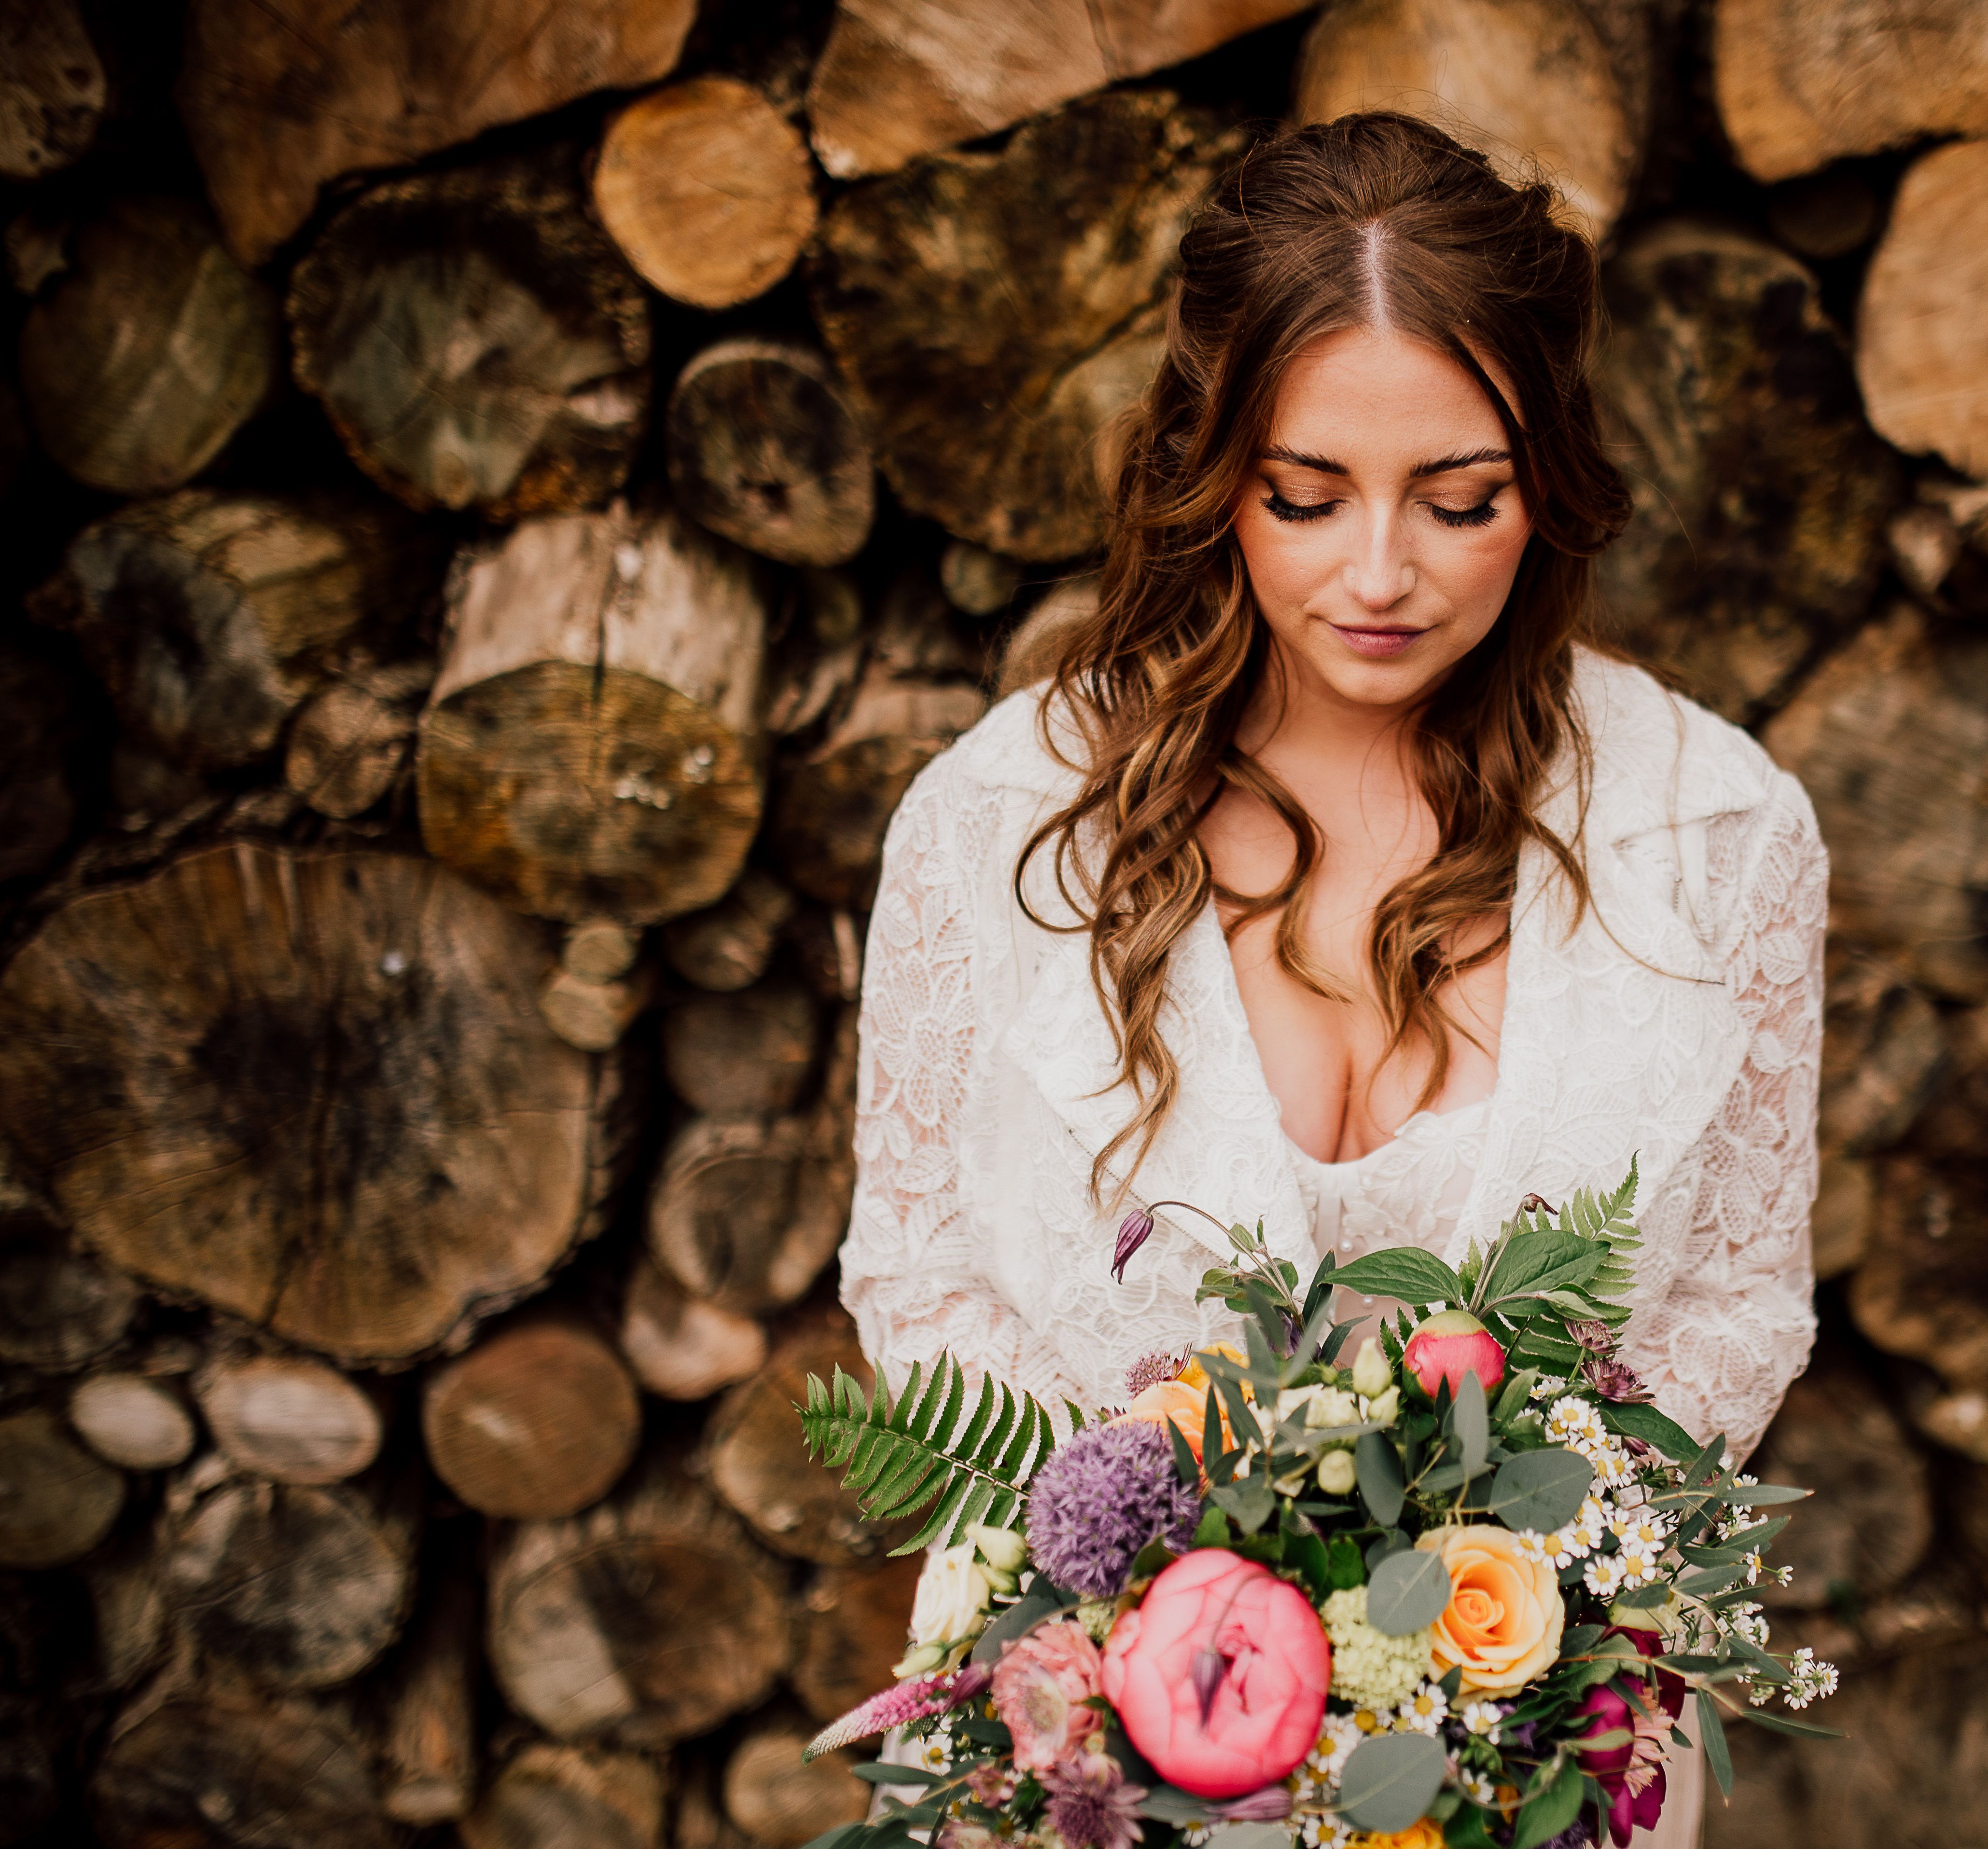 A bride down surrounded by logs with an array of vibrant, colourful flowers.